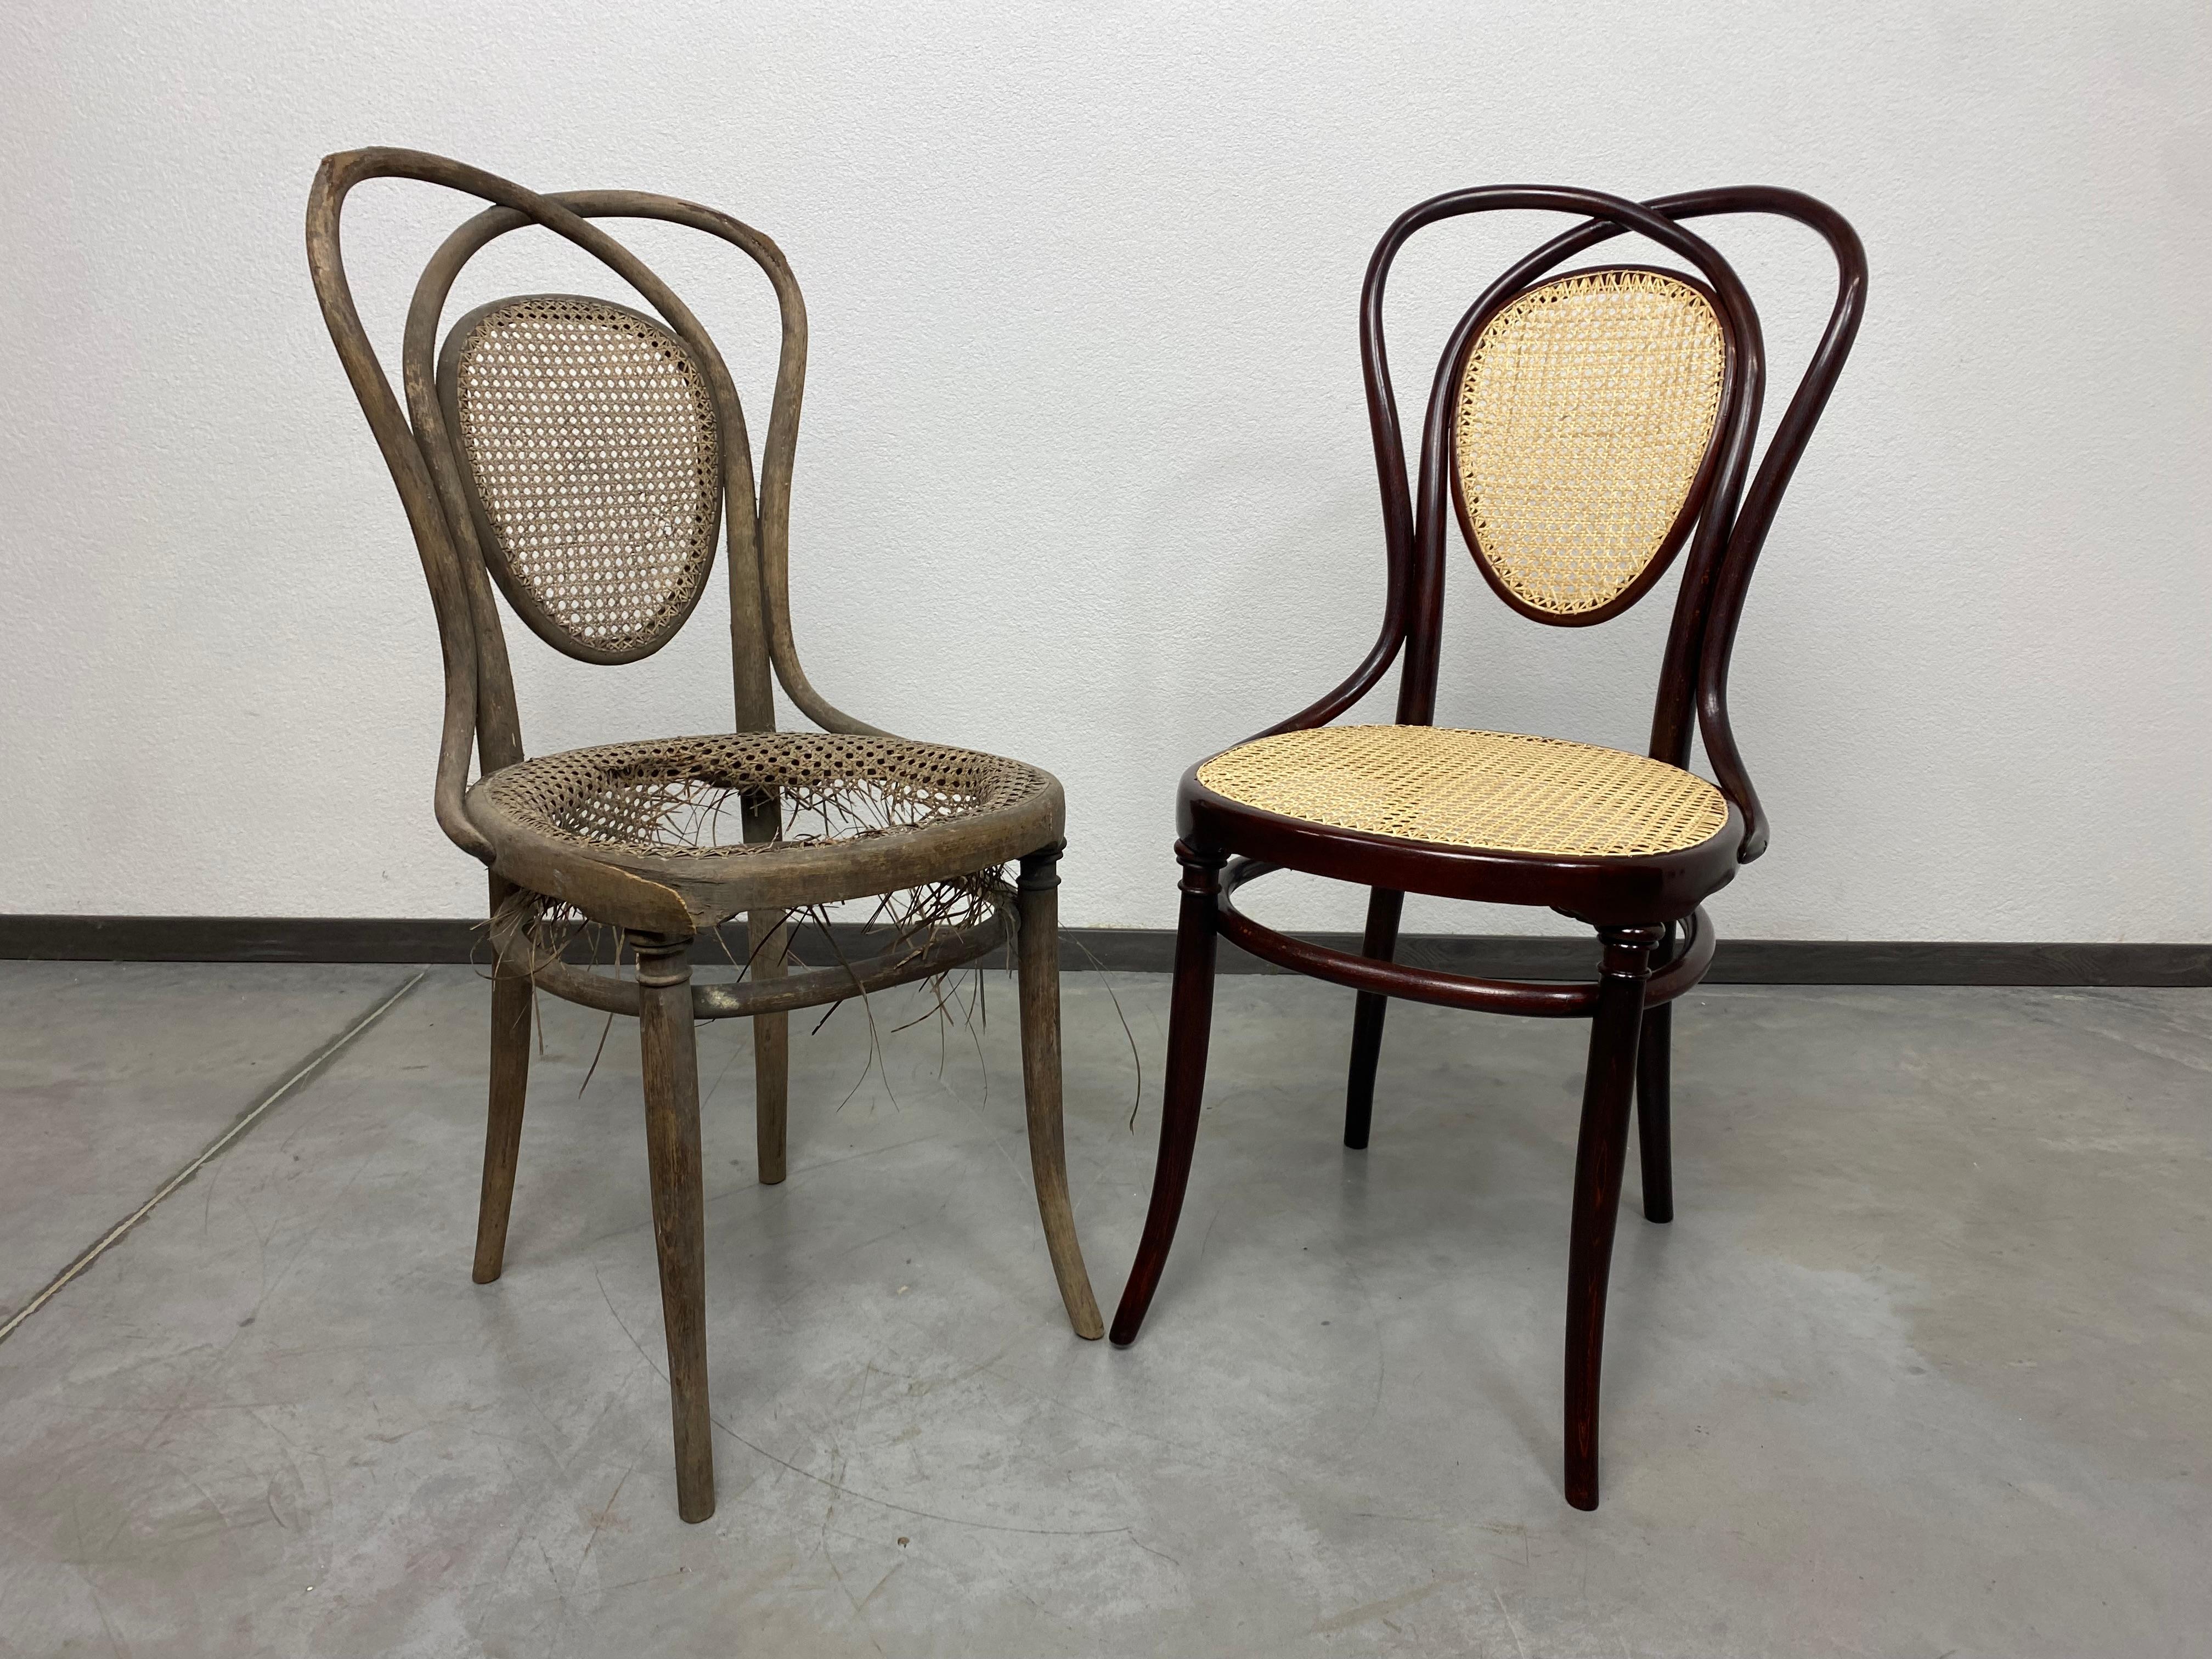 Bentwood dining room chair no.33 by J&J Kohn professionally stained and repolished with new rattan seat.